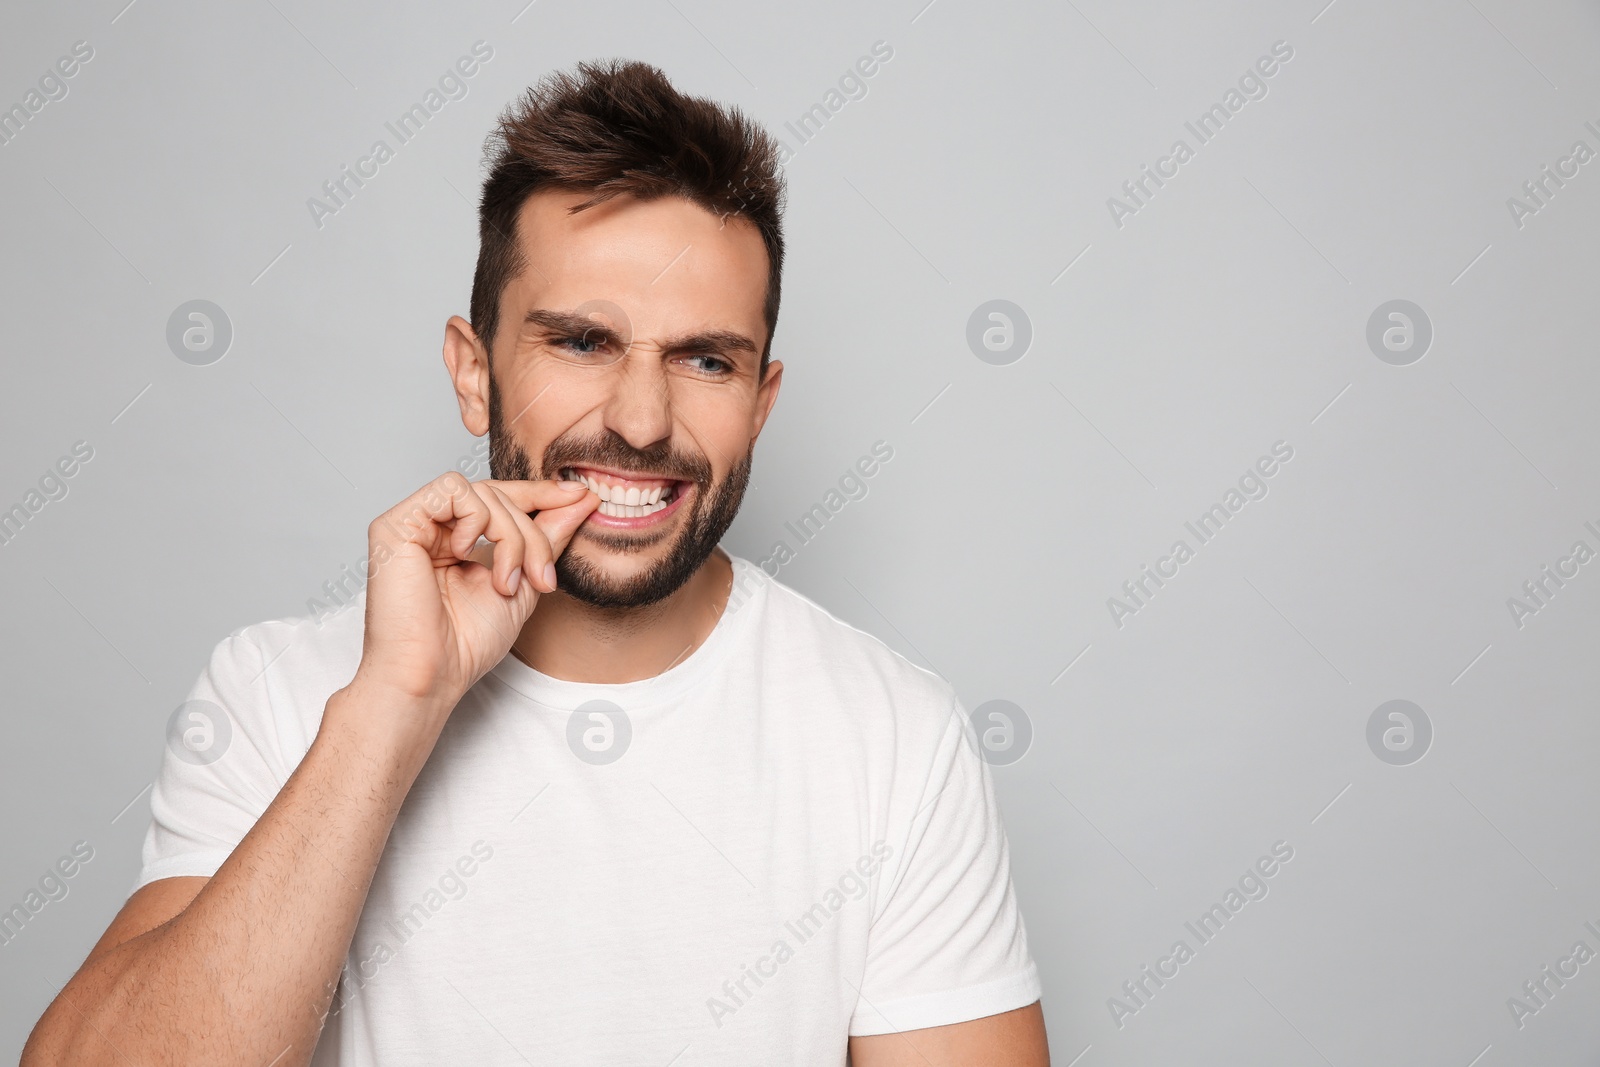 Photo of Man biting his nails on grey background. Space for text